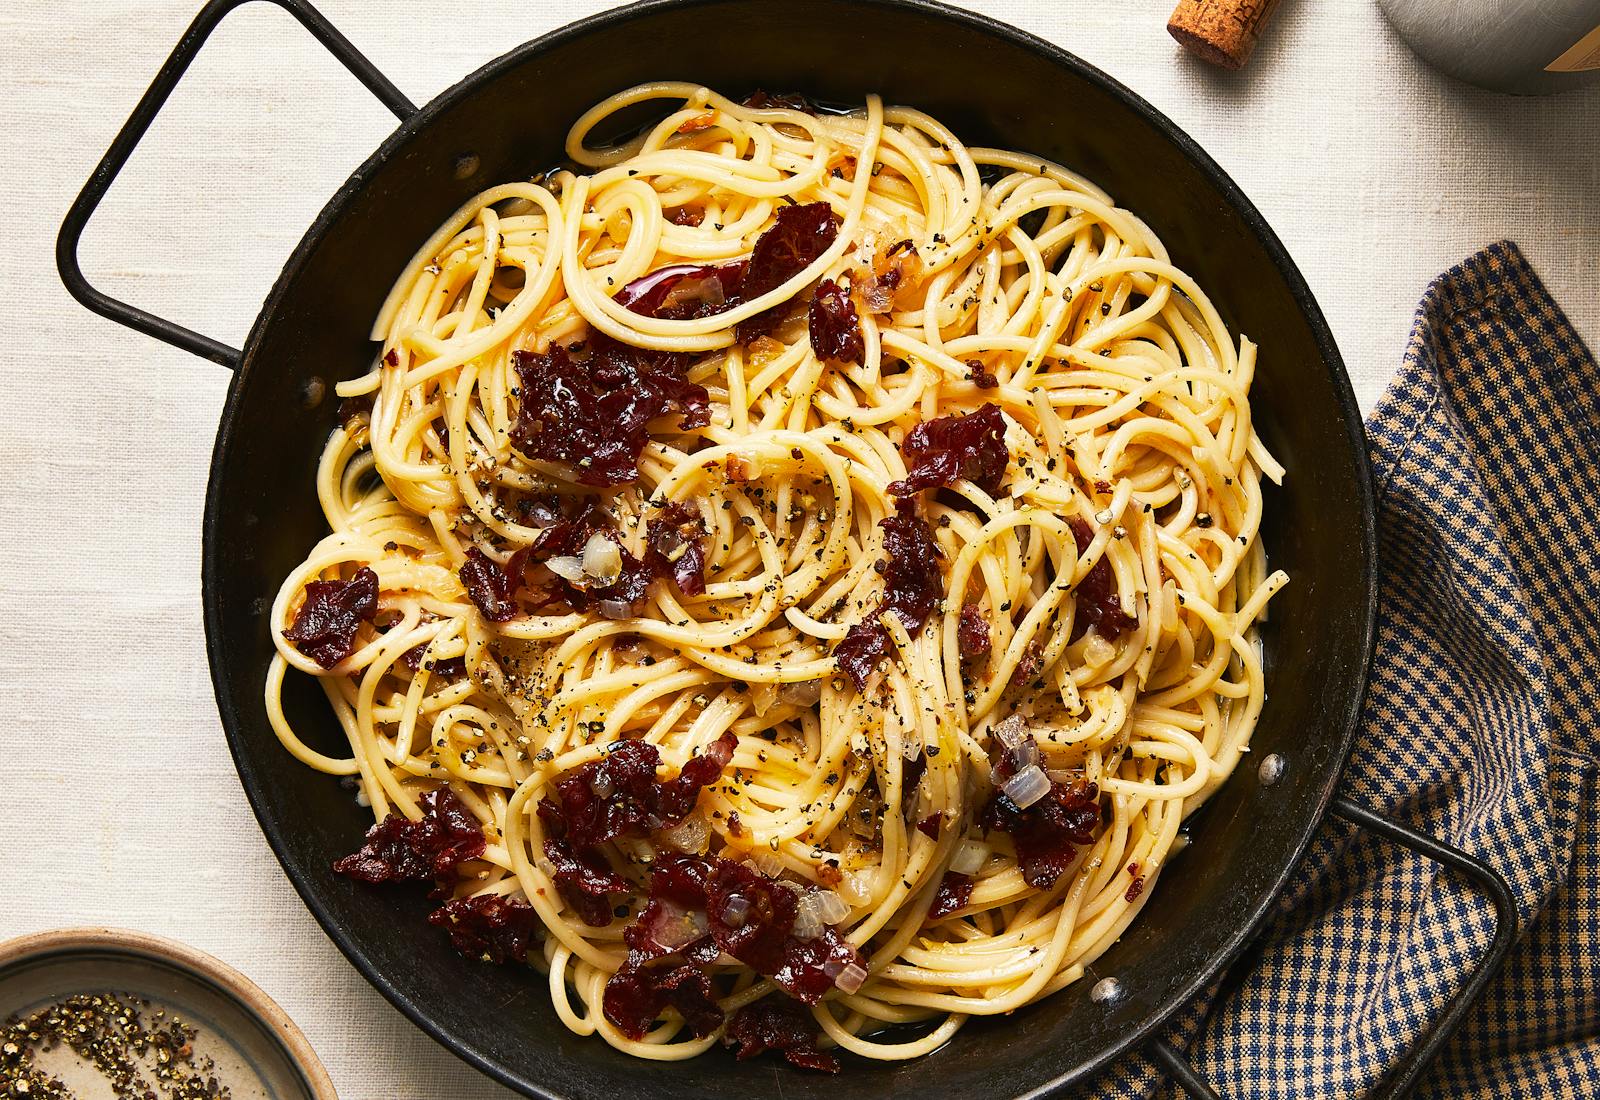 Carbonara in large serving pan with a checkered napkin on the side.